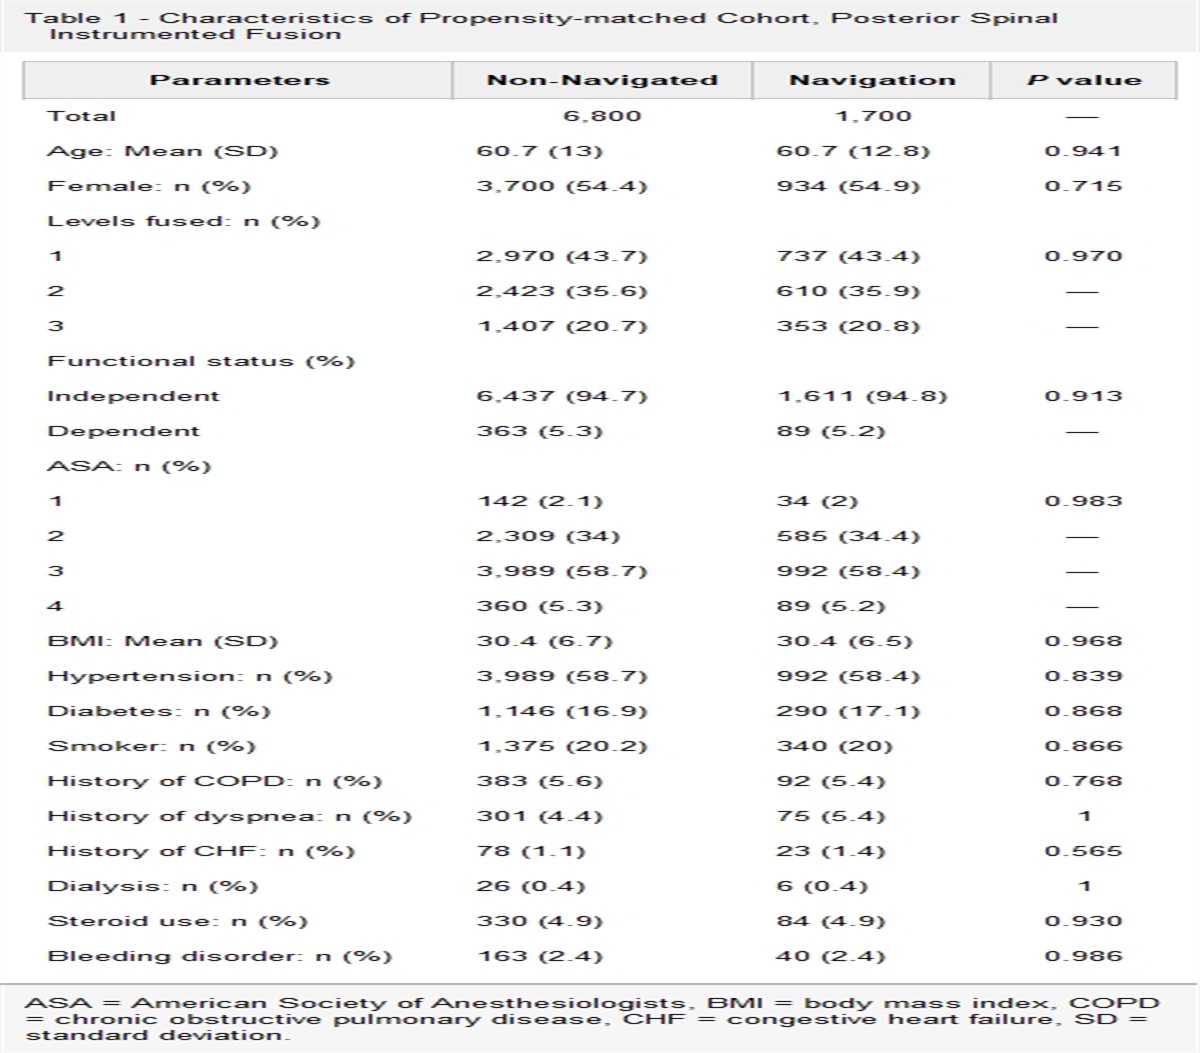 Computer-assisted Navigation in Lumbar Spine Instrumented Fusions: Comparison of In-hospital and 30-Day Postoperative Complications With Nonnavigated Fusions in a National Database